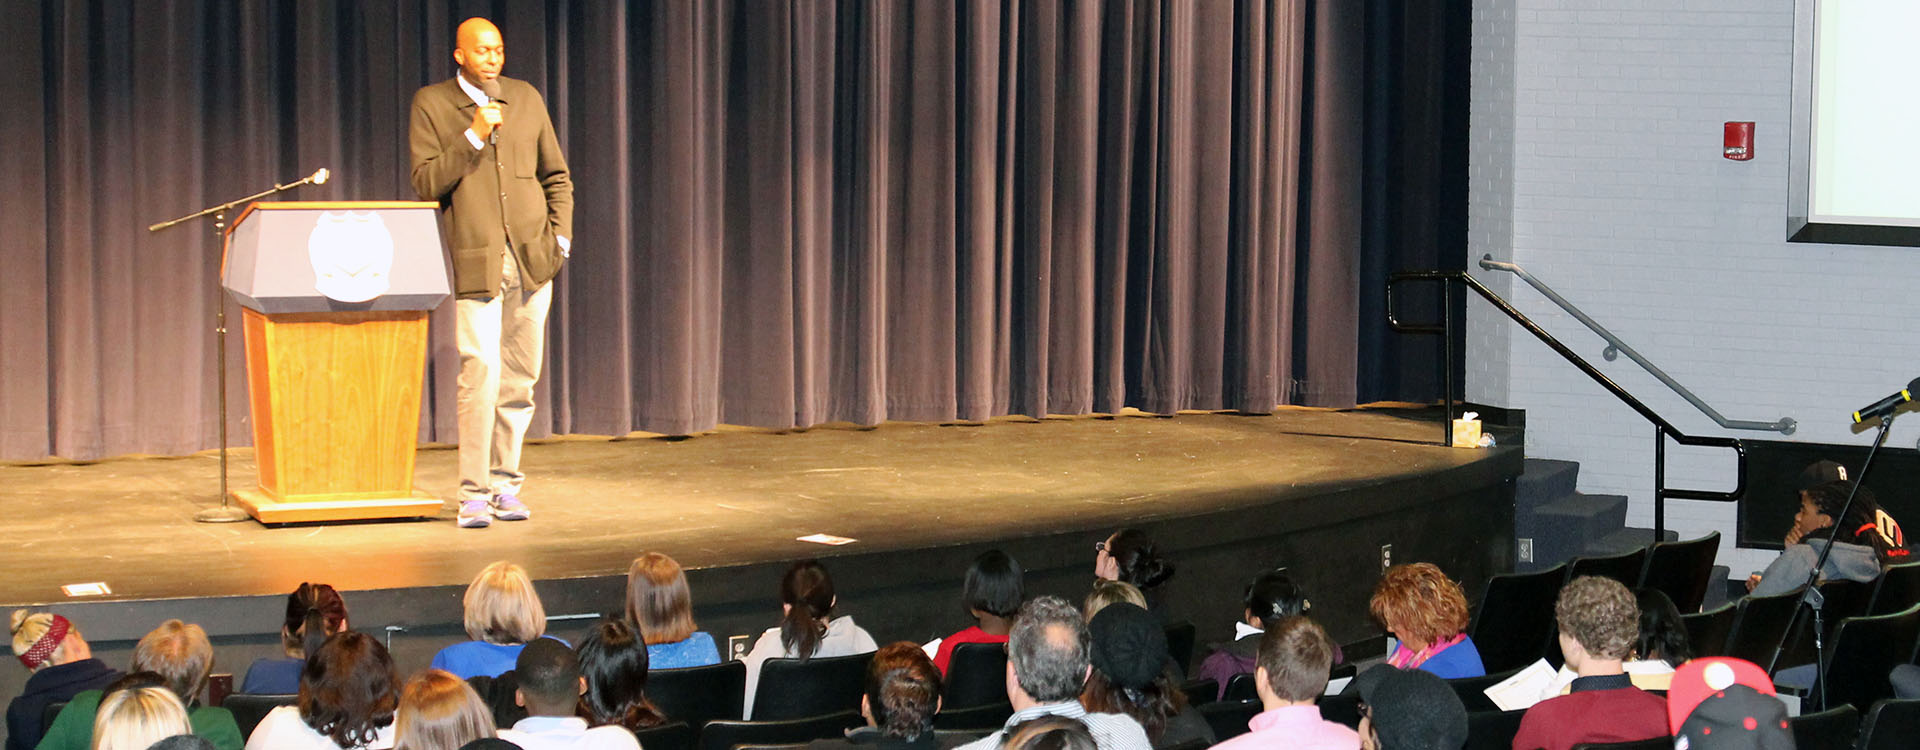 public speaker standing on stage in front of audience